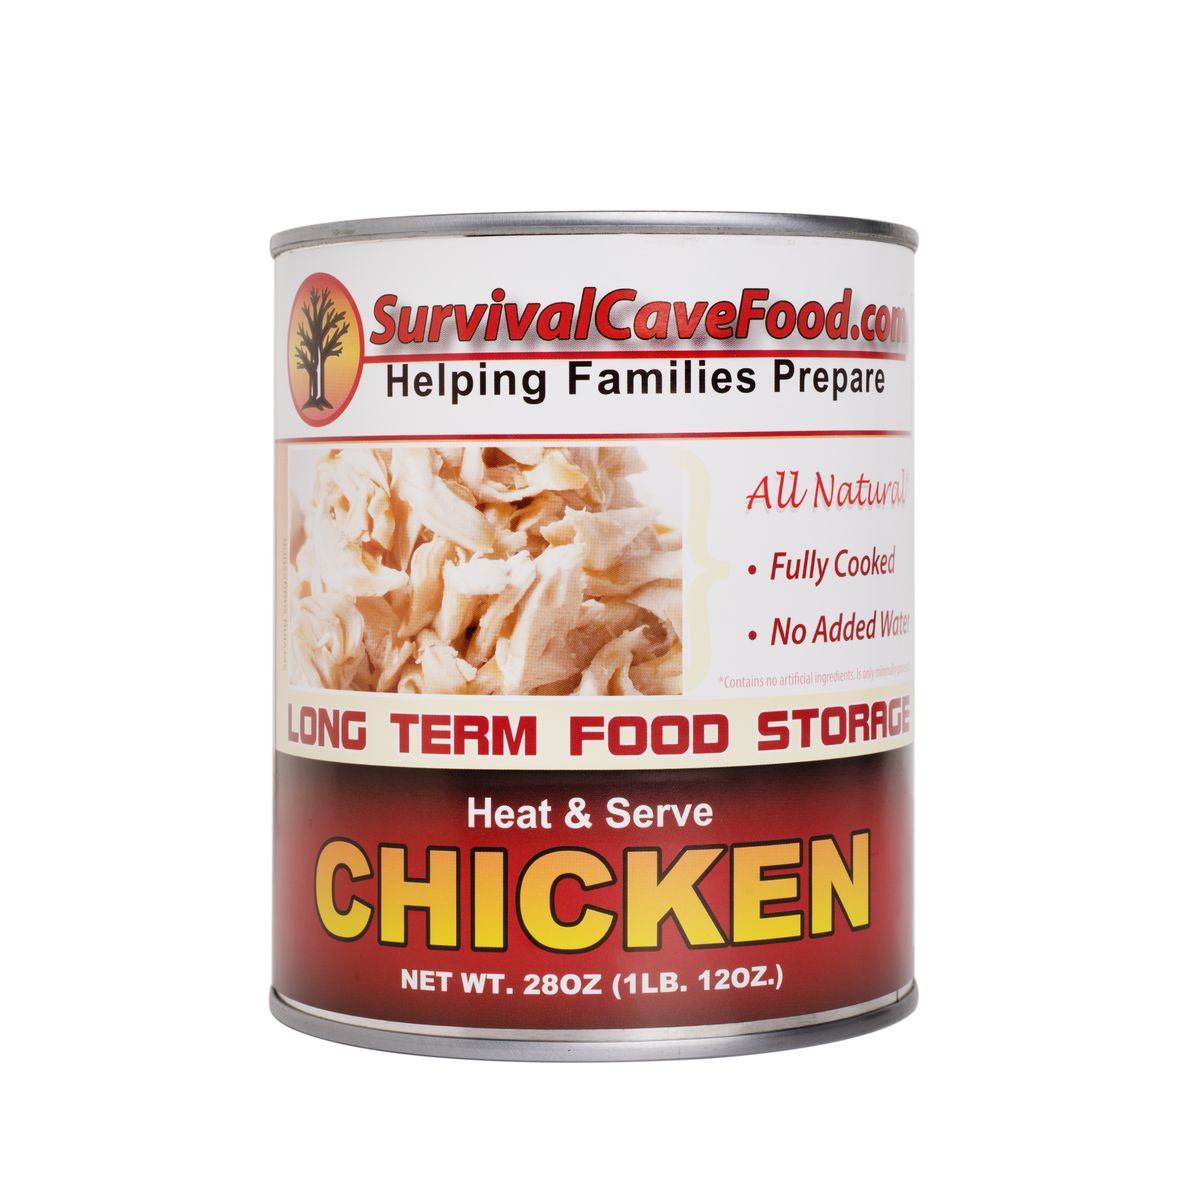 Survival care emergency food storage canned chicken.